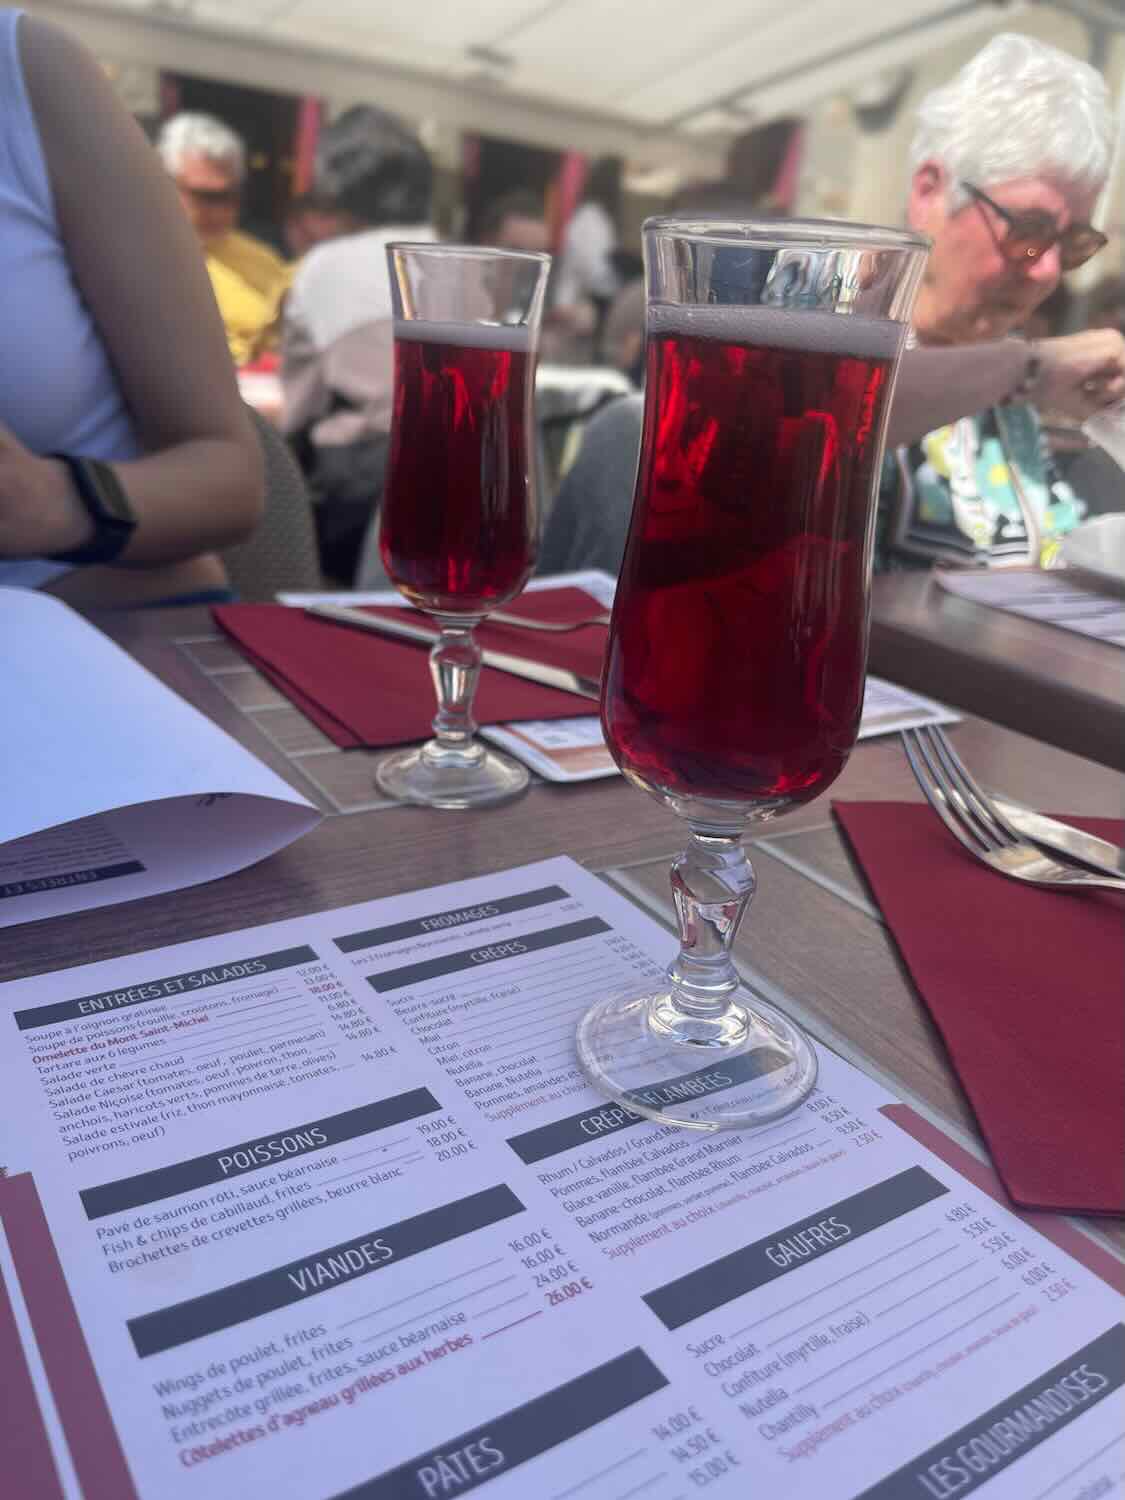 Two glasses of red kir on a restaurant table in Mont Saint Michel, with a blurred menu and diners in the background, offering a glimpse into local culinary experiences.